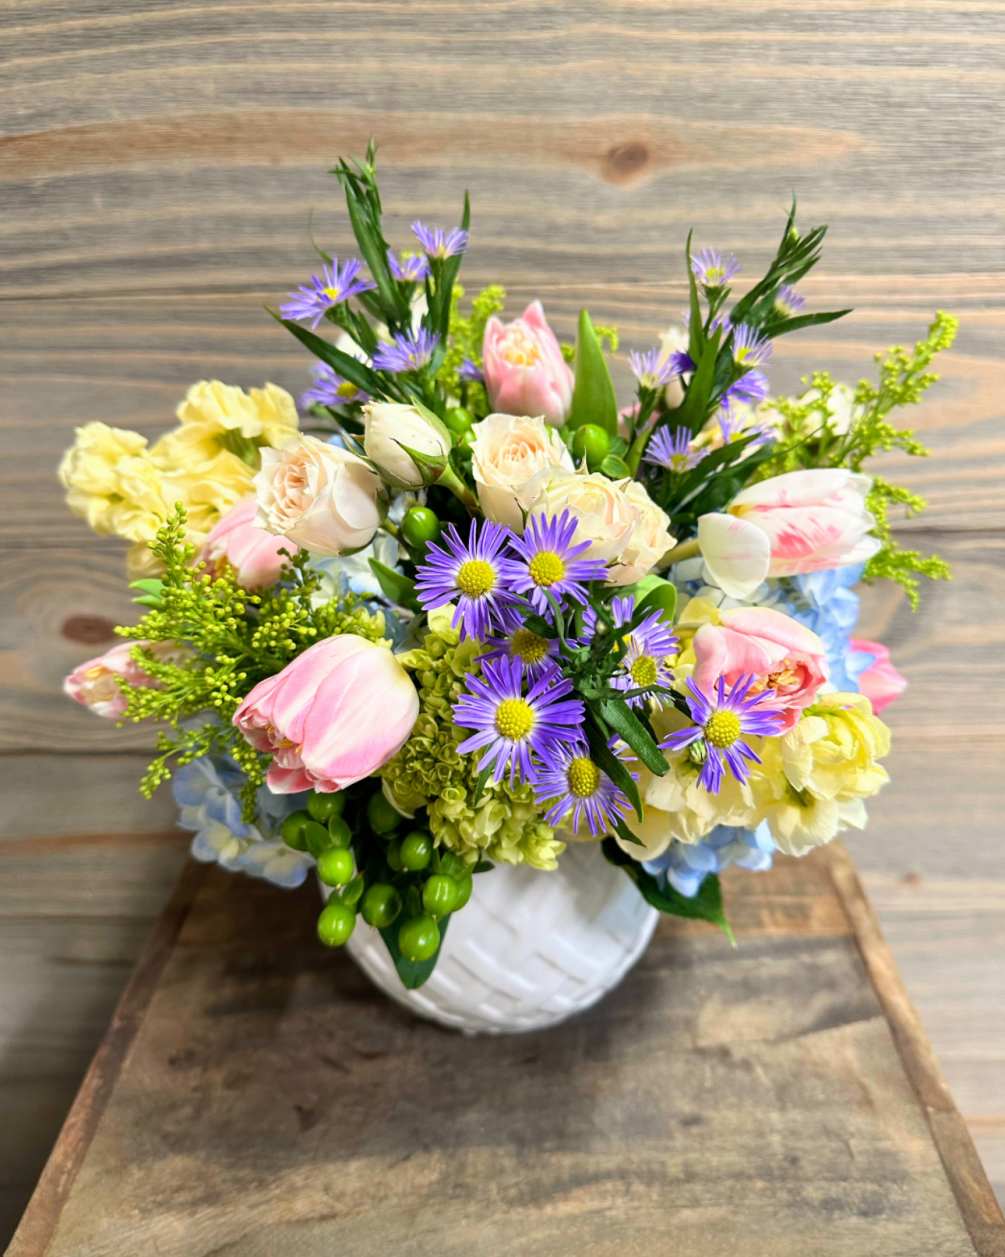 A beautiful mix of spring blooms in soft colors!